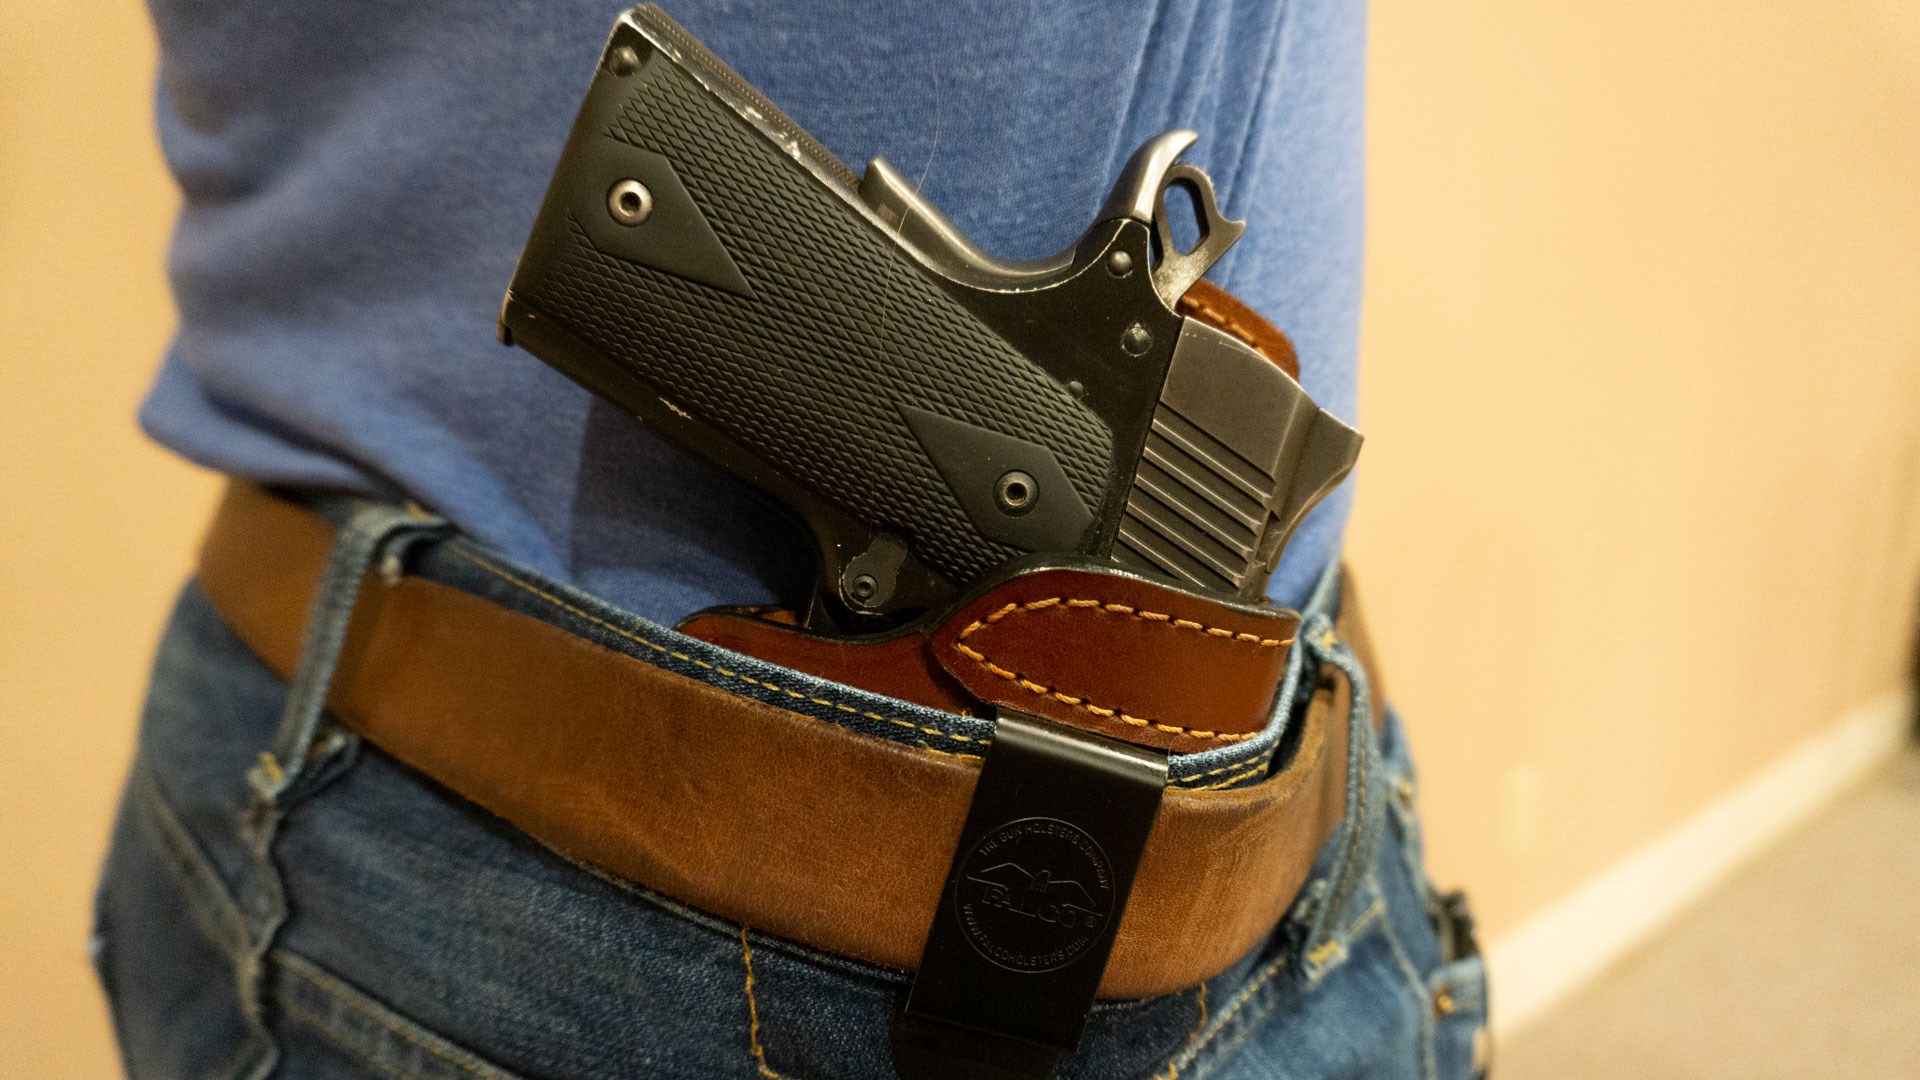 Holster in 4 o'clock position